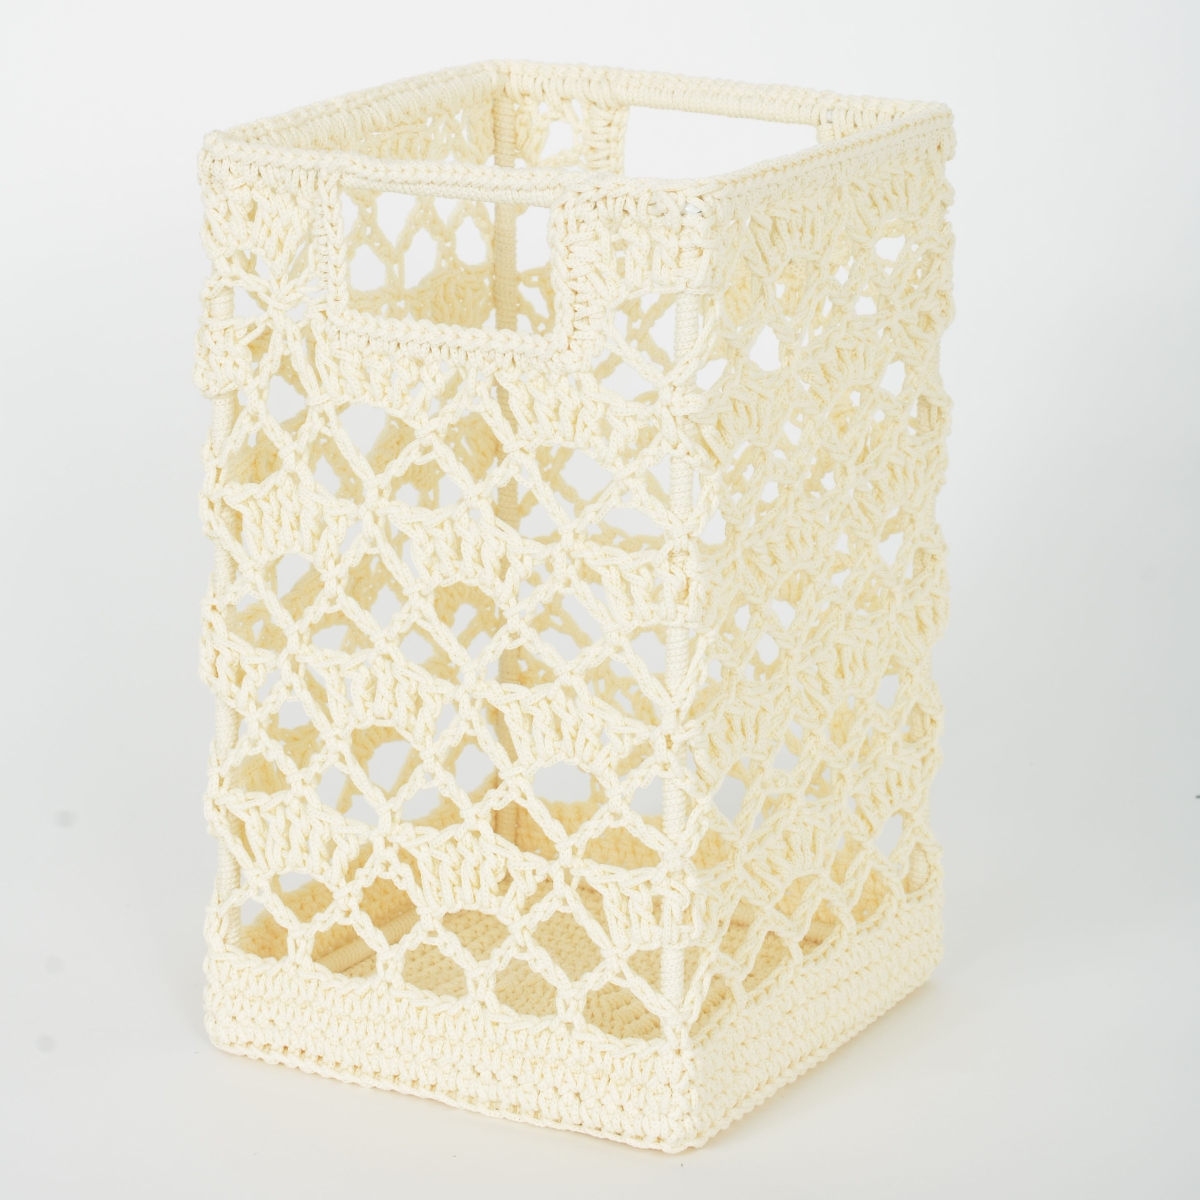 Picture of Heritage Lace MC-1125CR Mode Crochet Basket, Cream - 9 x 5.5 x 5.5 in.